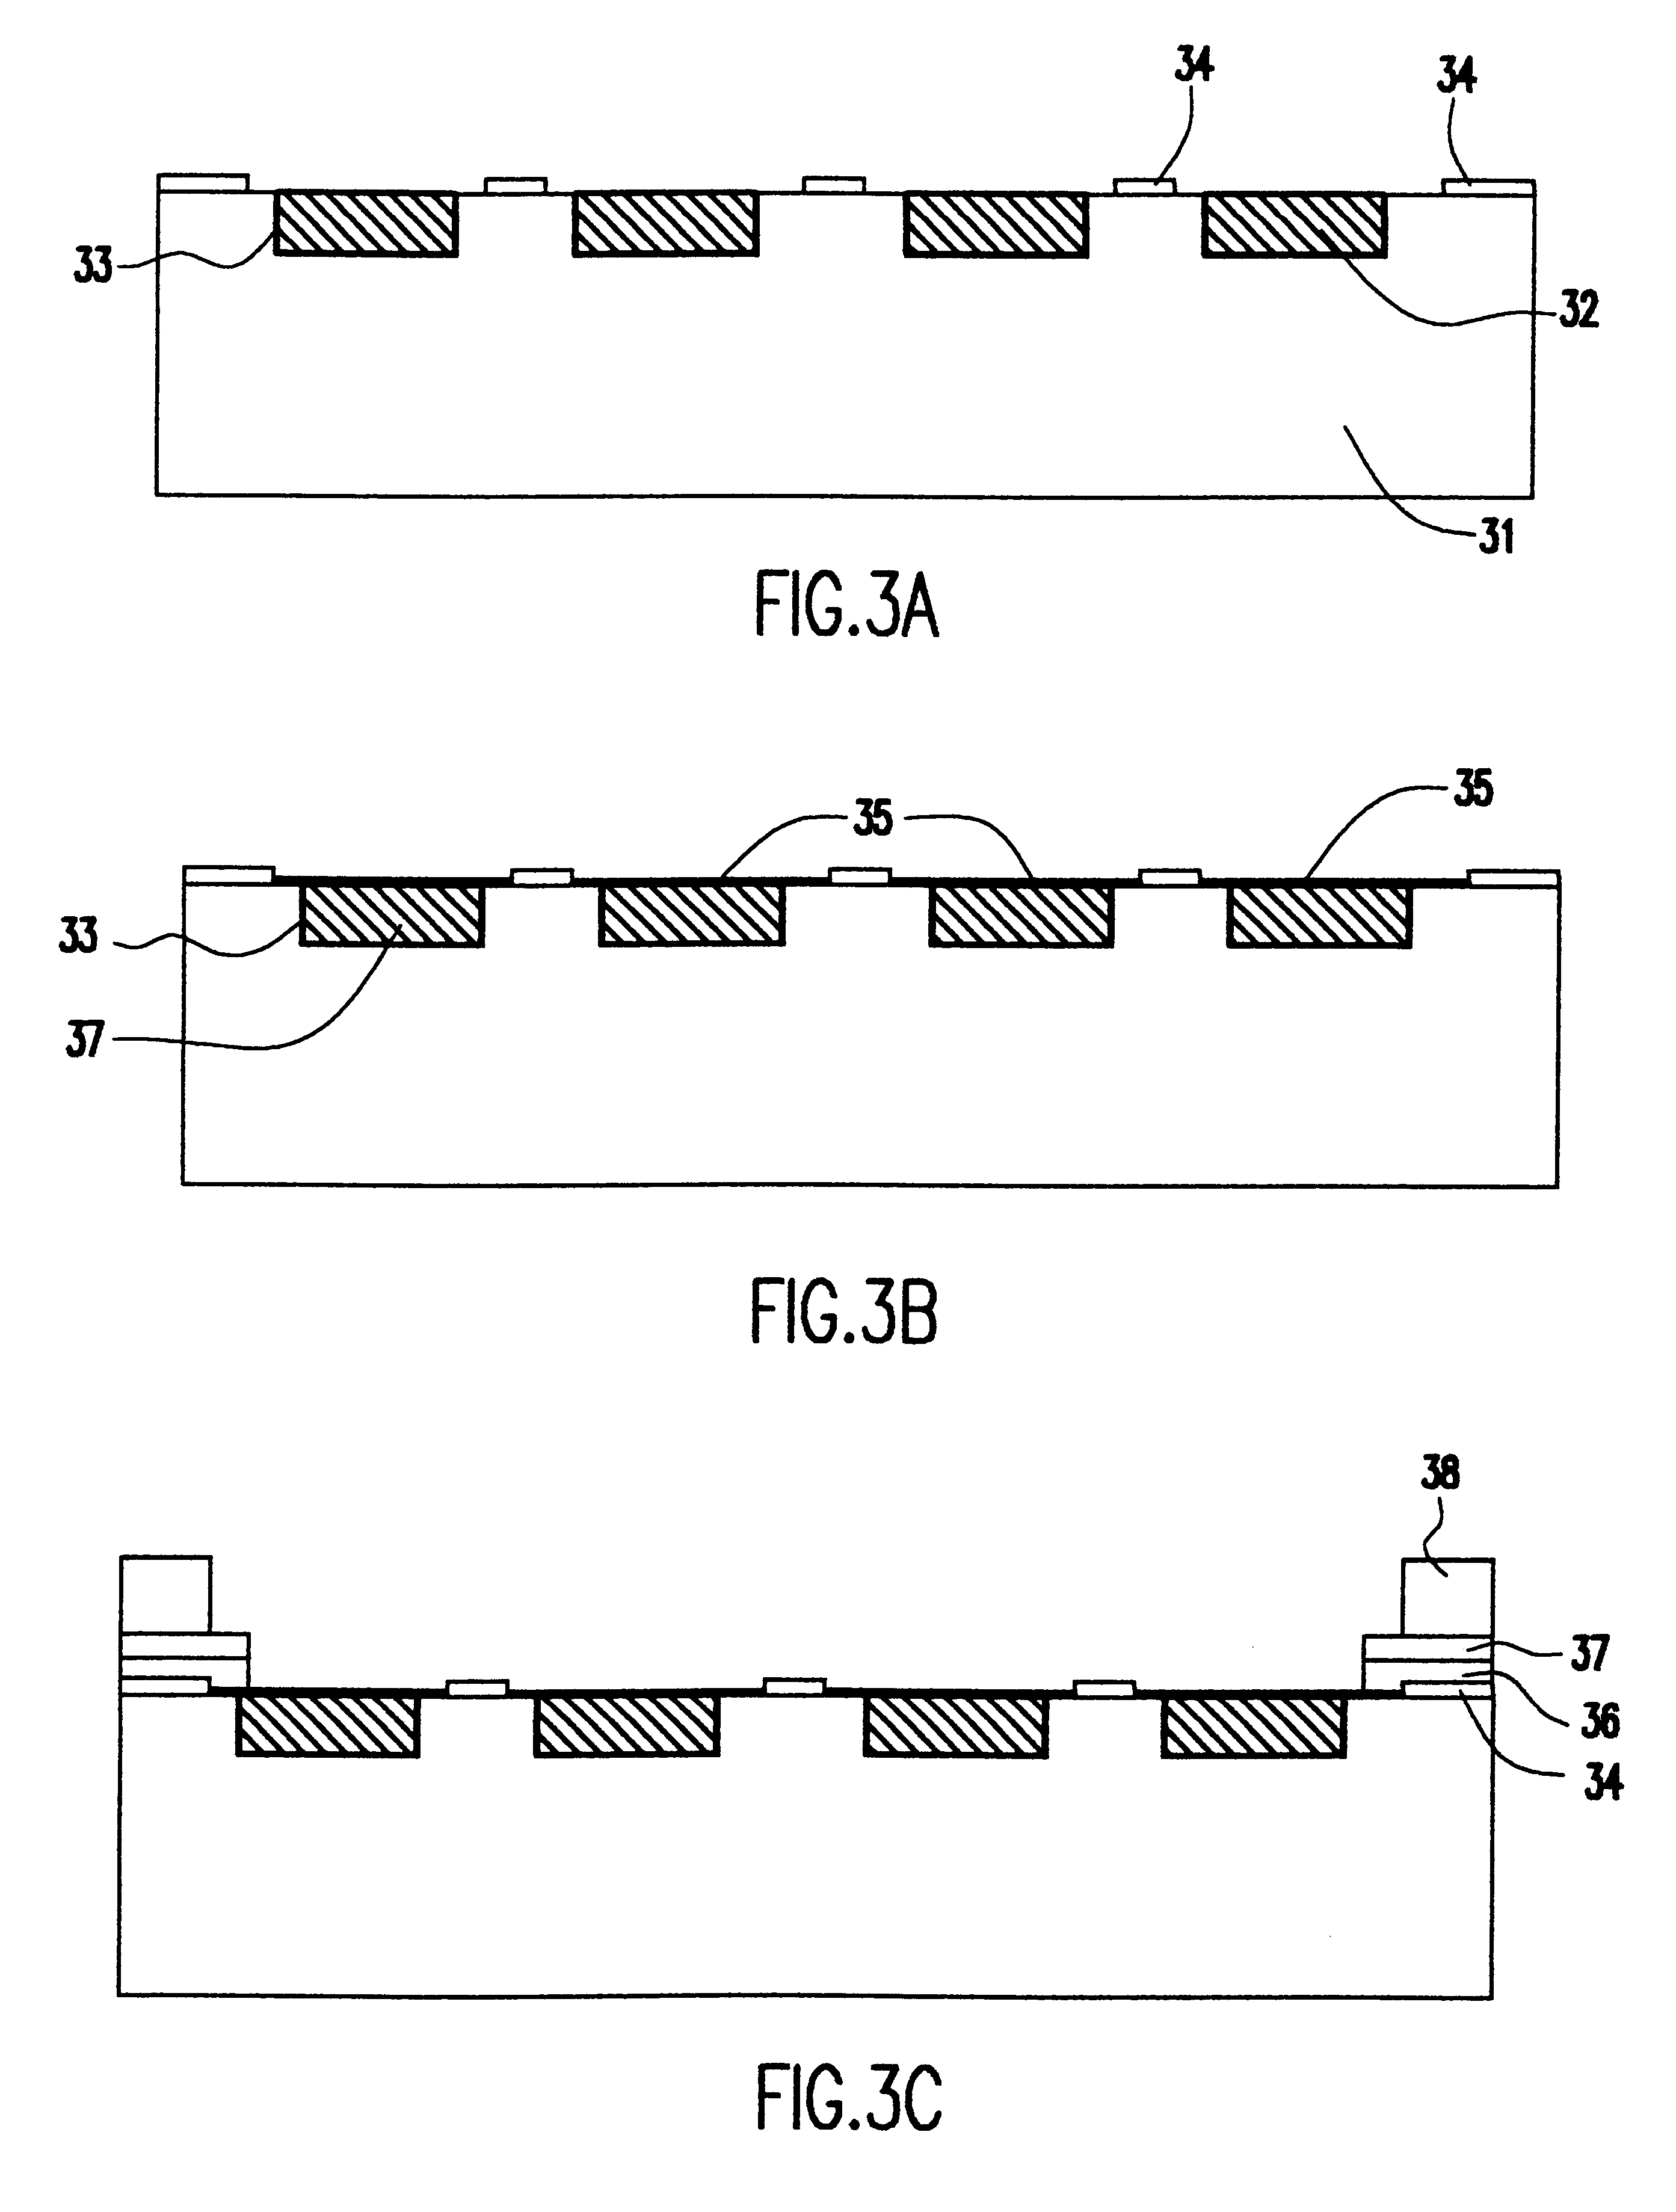 Self-aligned last-metal C4 interconnection layer for Cu technologies